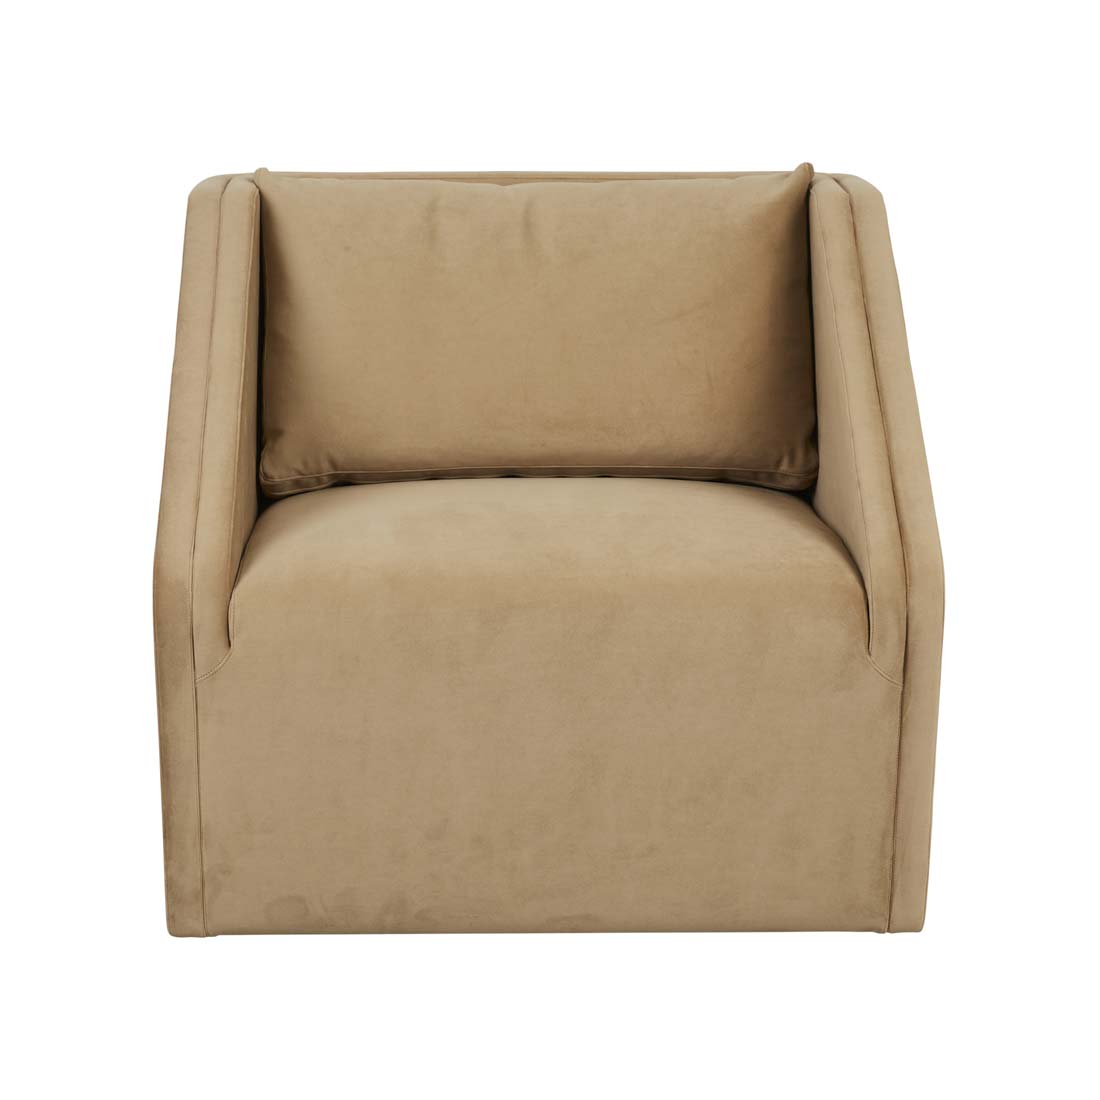 Nyle Occasional Chair